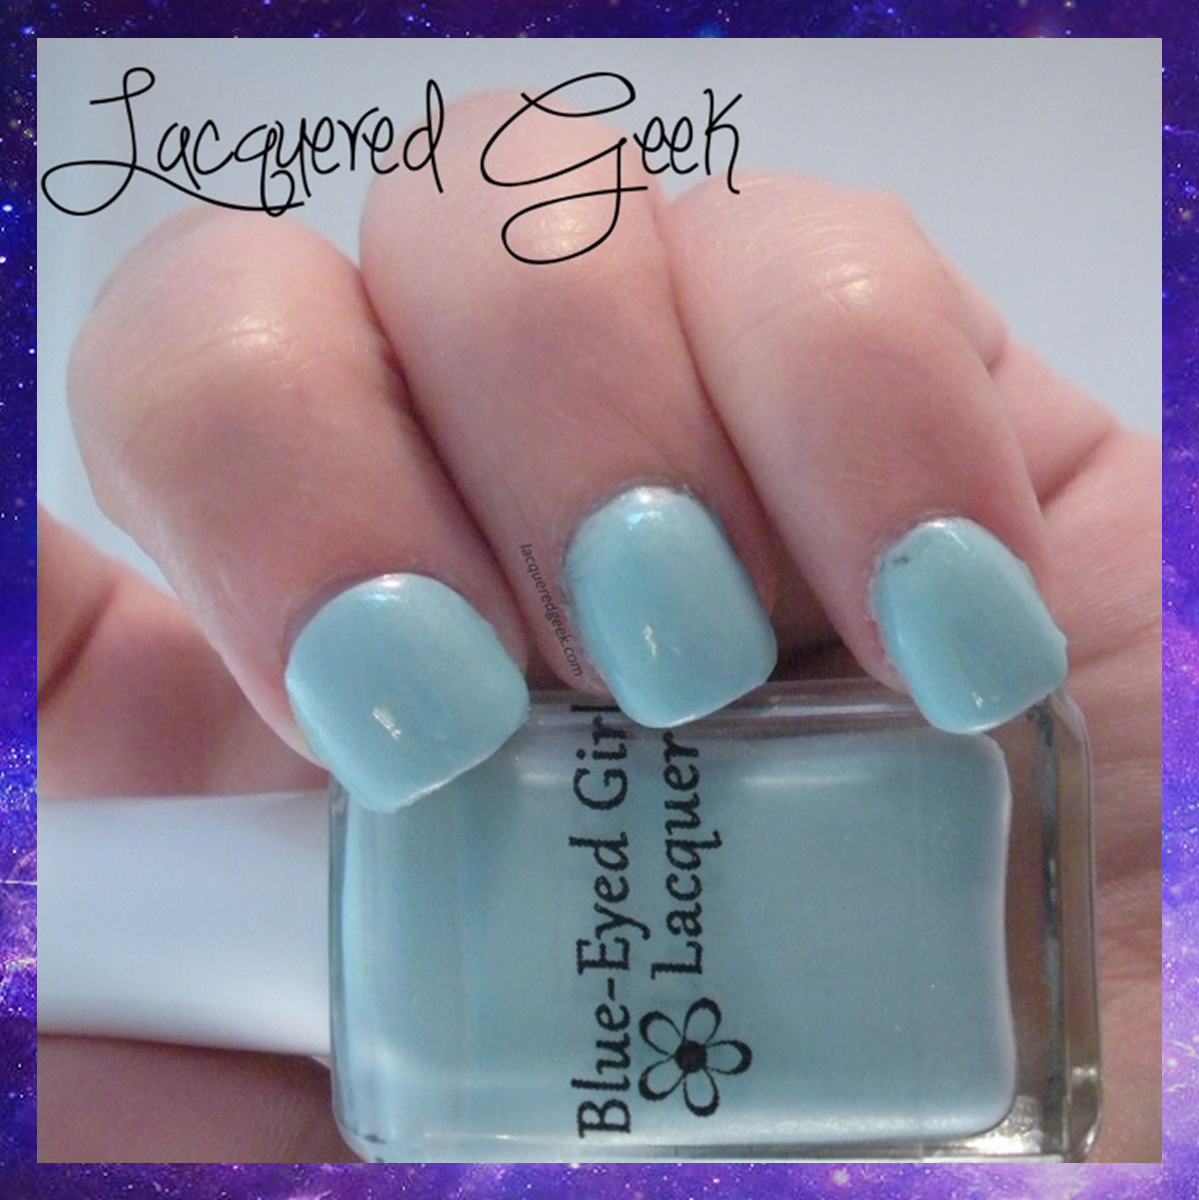 blue-eyed girl lacquer monster's tea at tiffany's